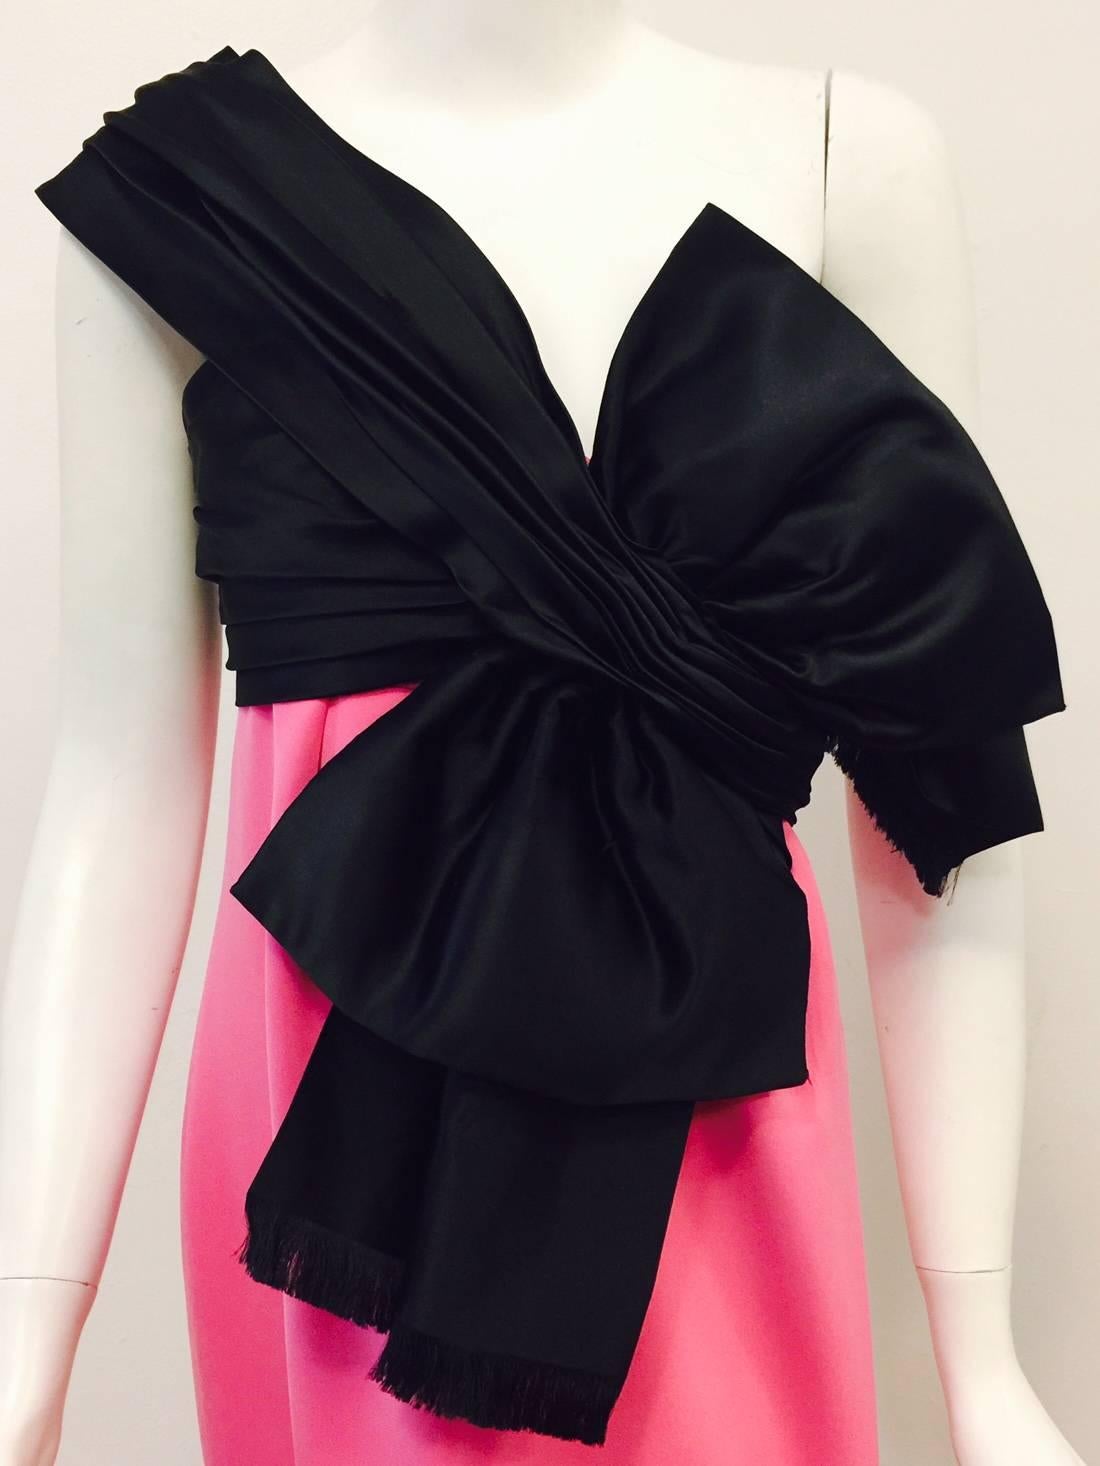 Women's Christian Dior Boutique Black & Pink Silk One Shoulder Cocktail Dress With Bow For Sale